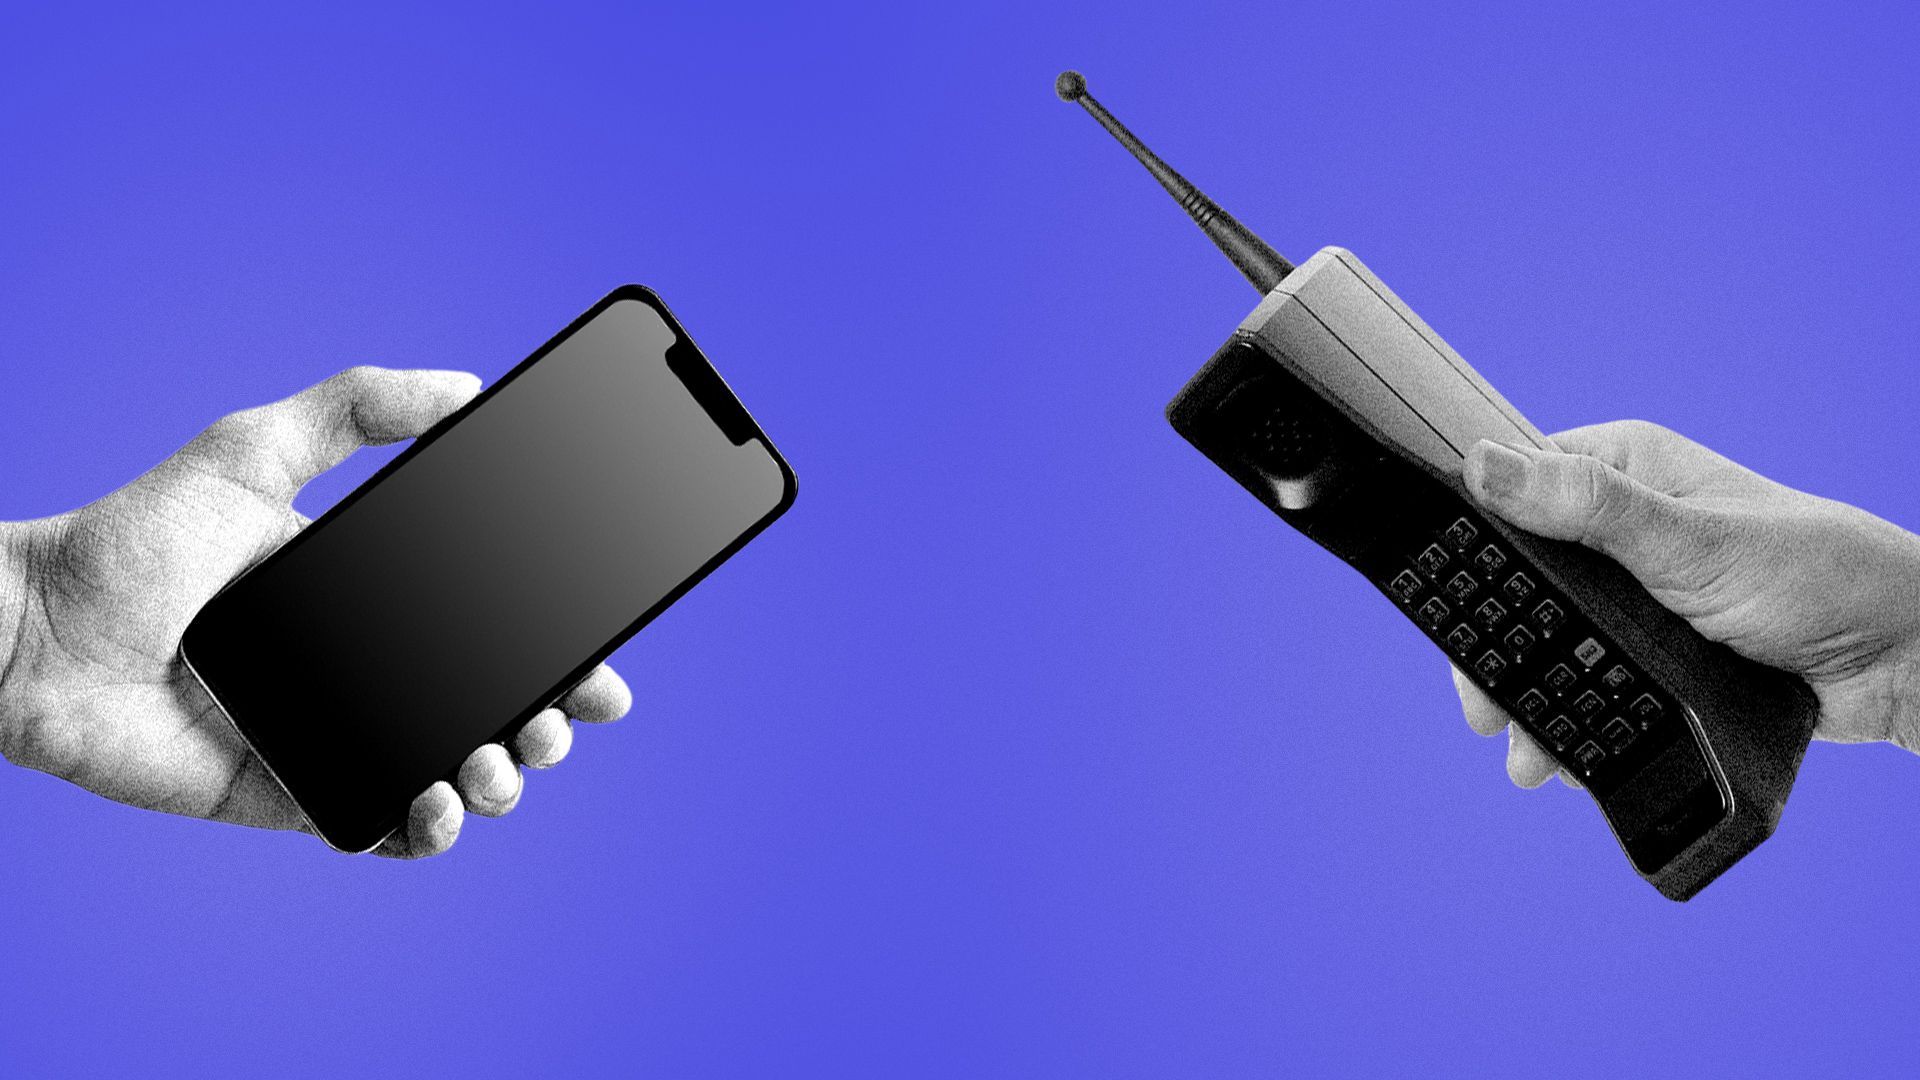 In this illustration, one person holds an iPhone while another person holds a landline